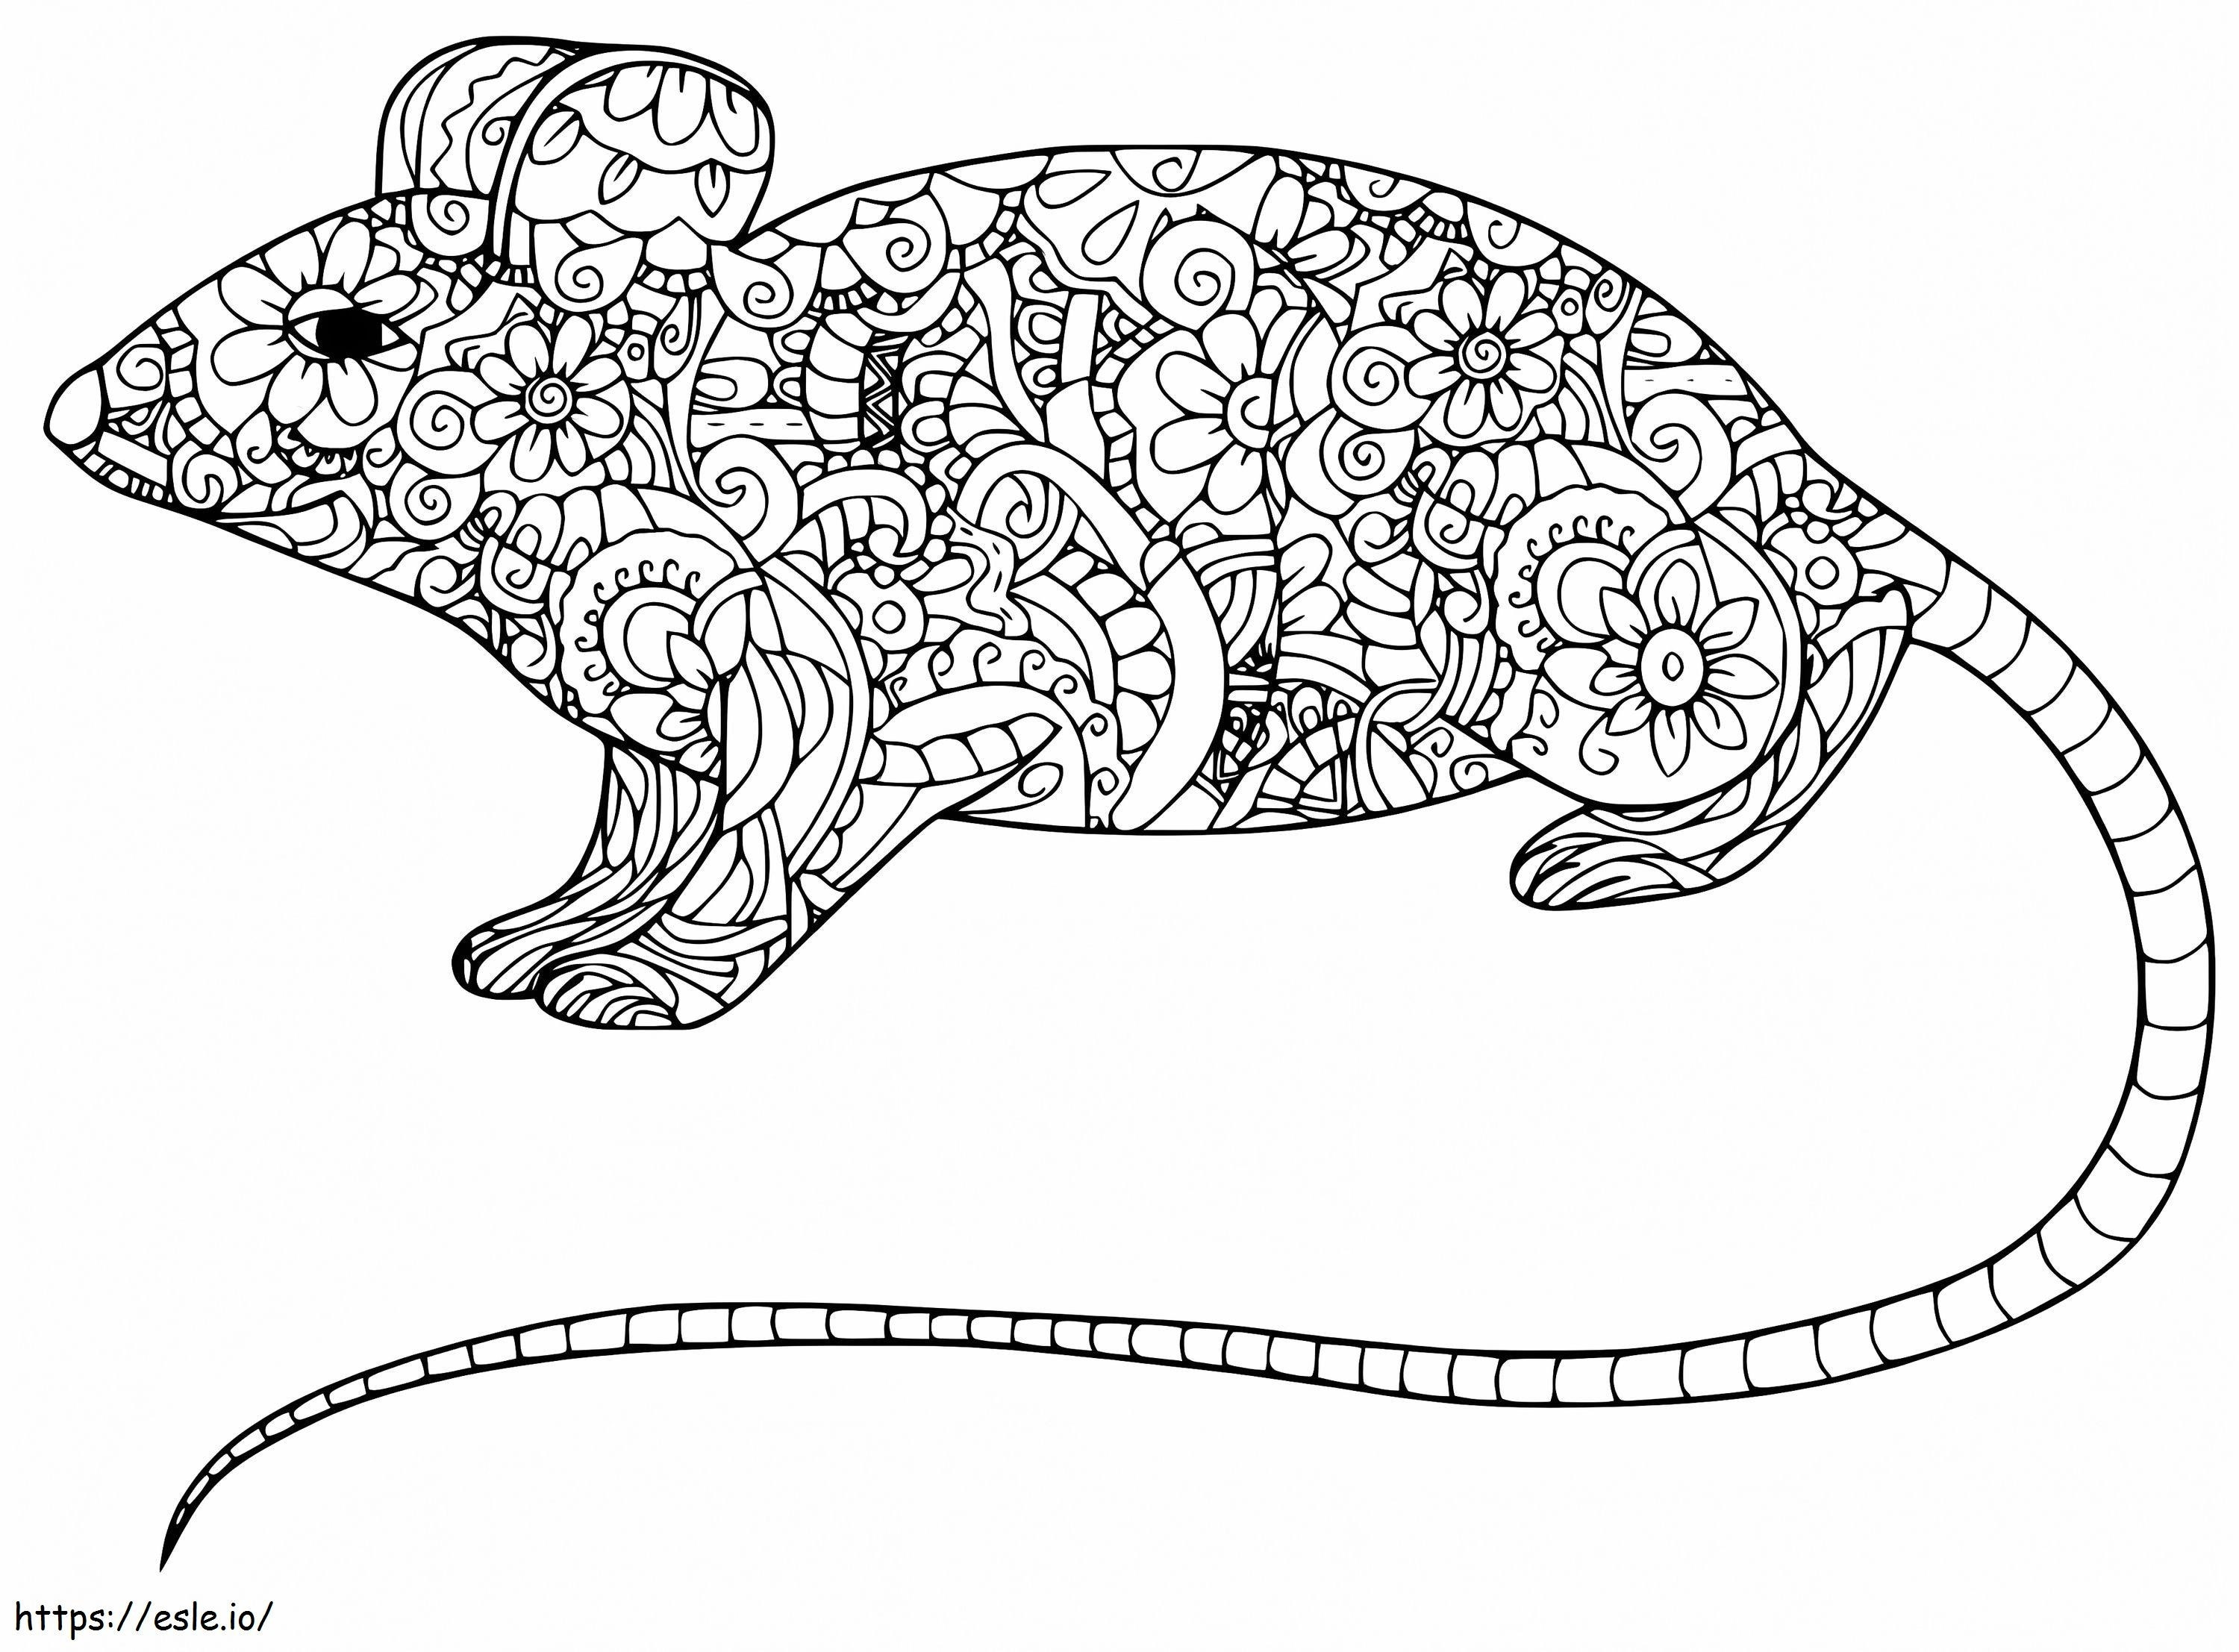 Zentangle Rat coloring page